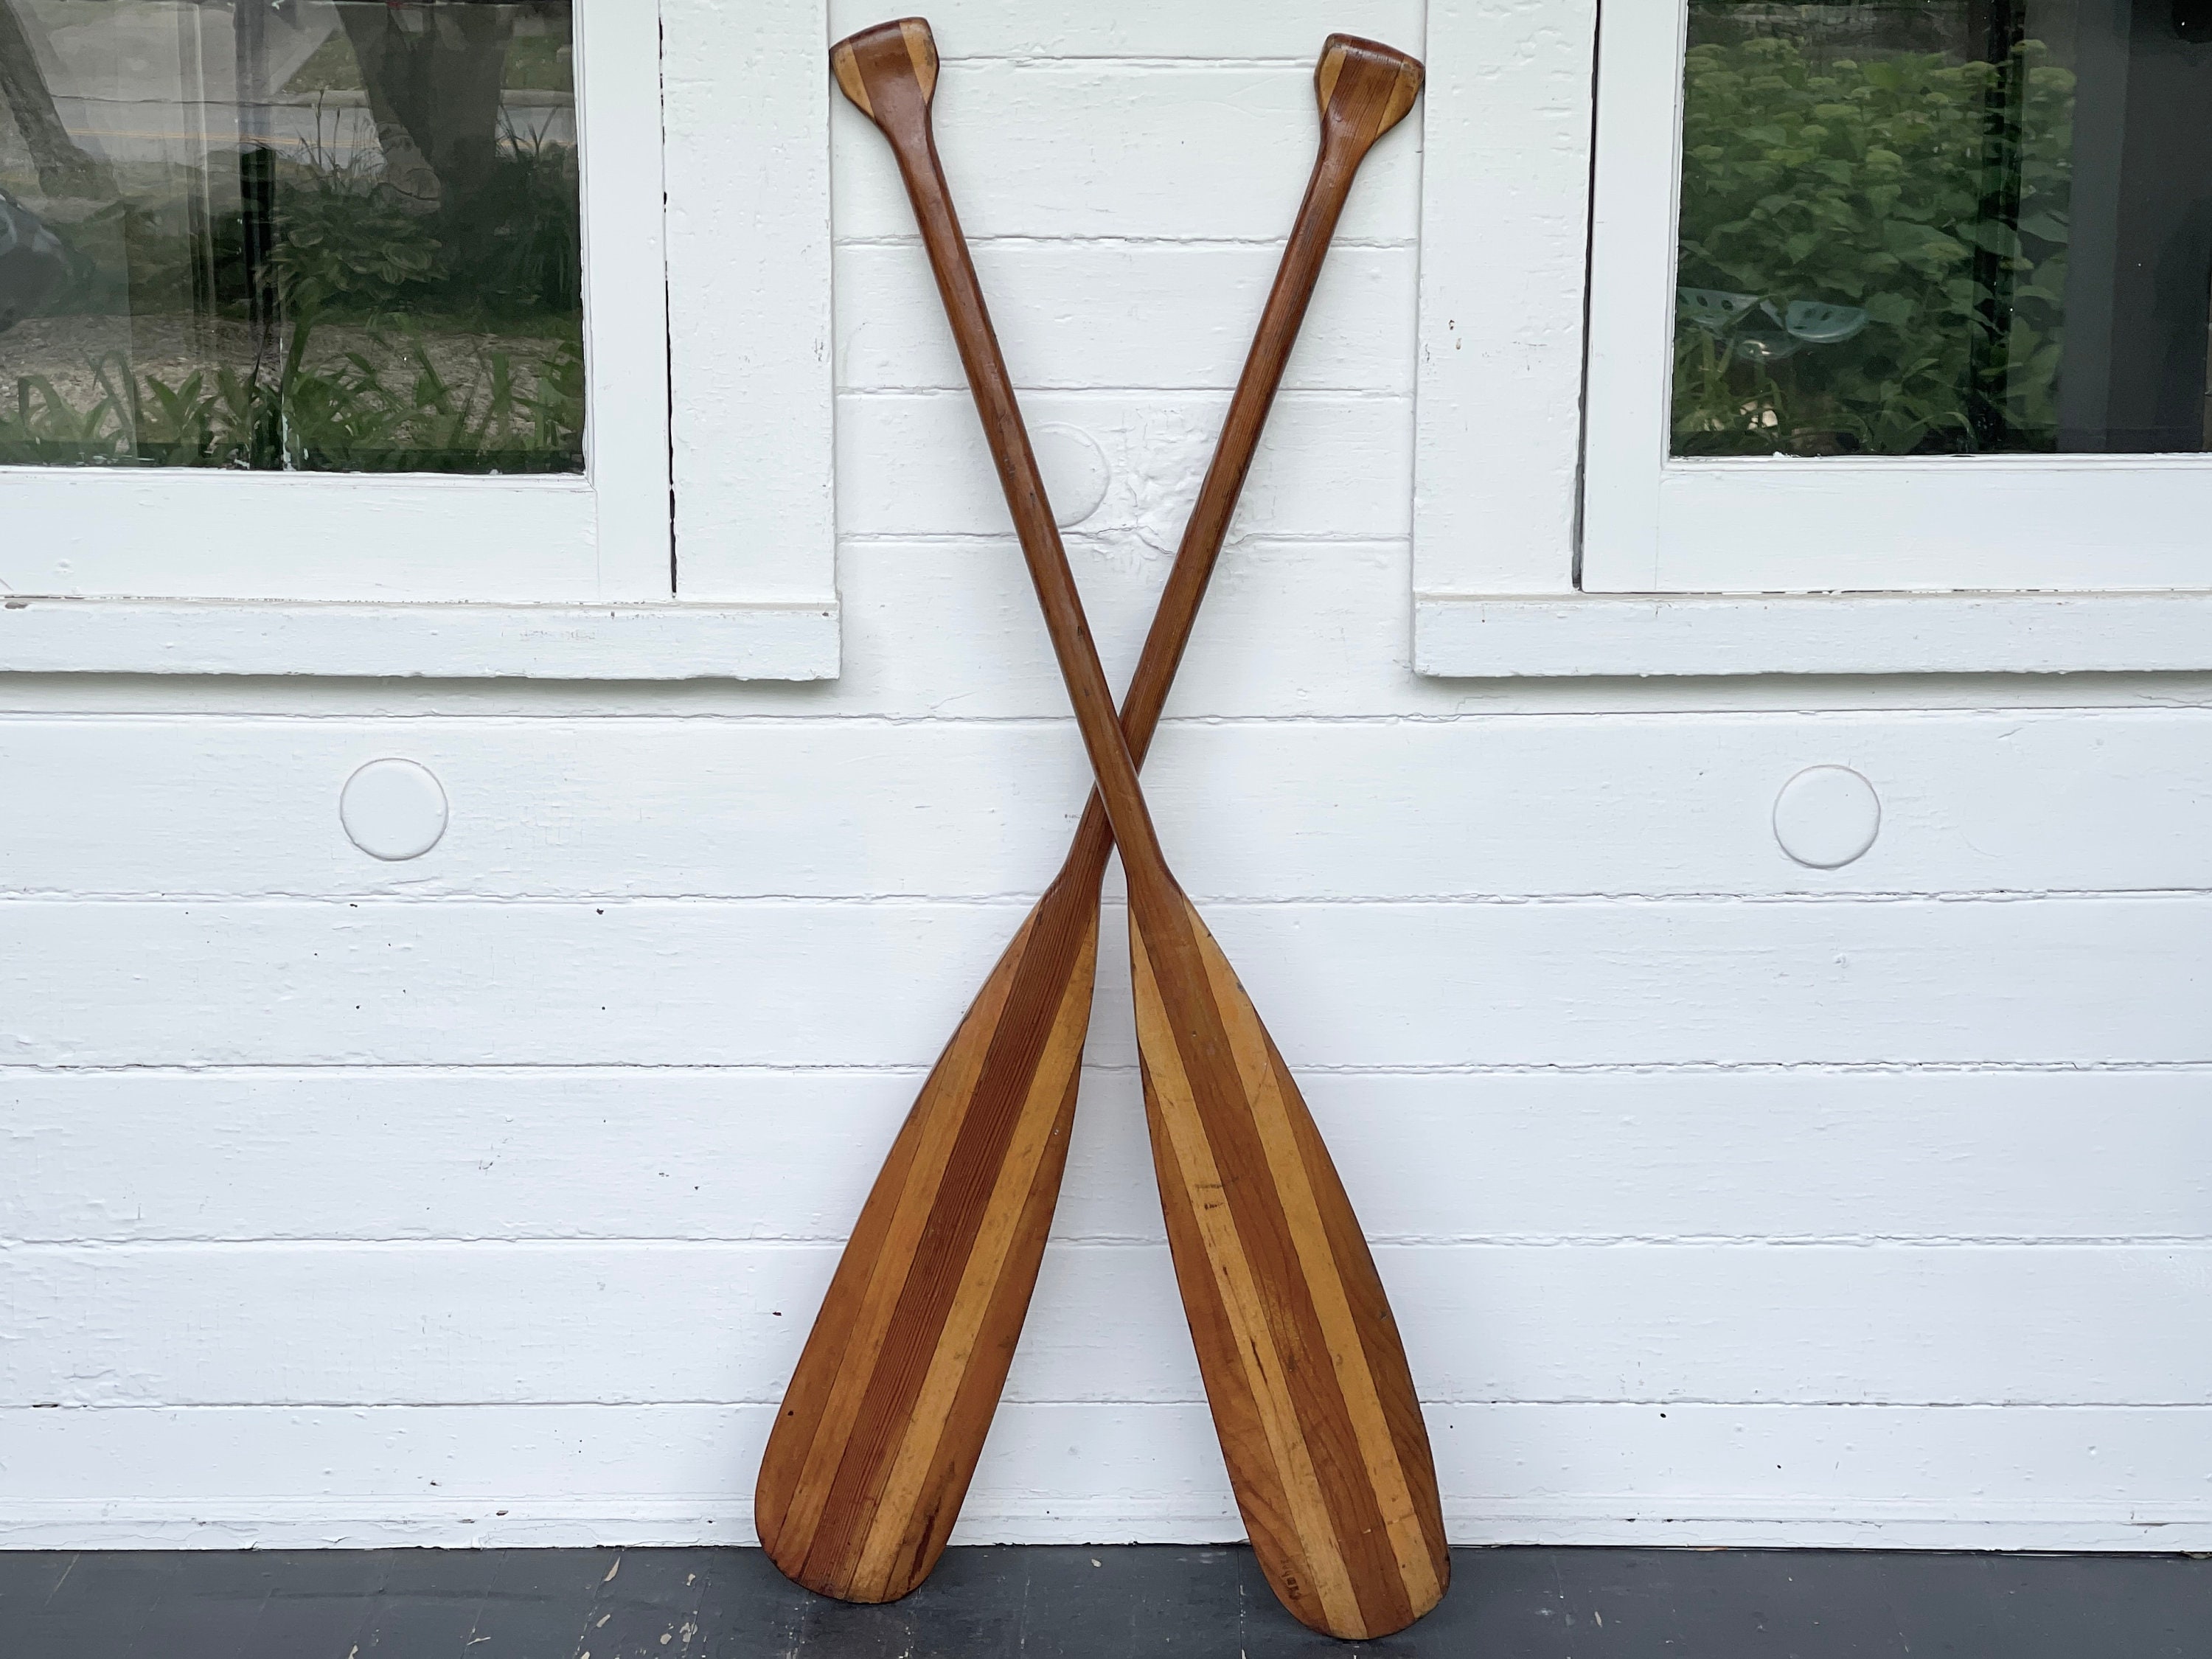 Feather Brand Wooden Oar 47 Inches Paddle